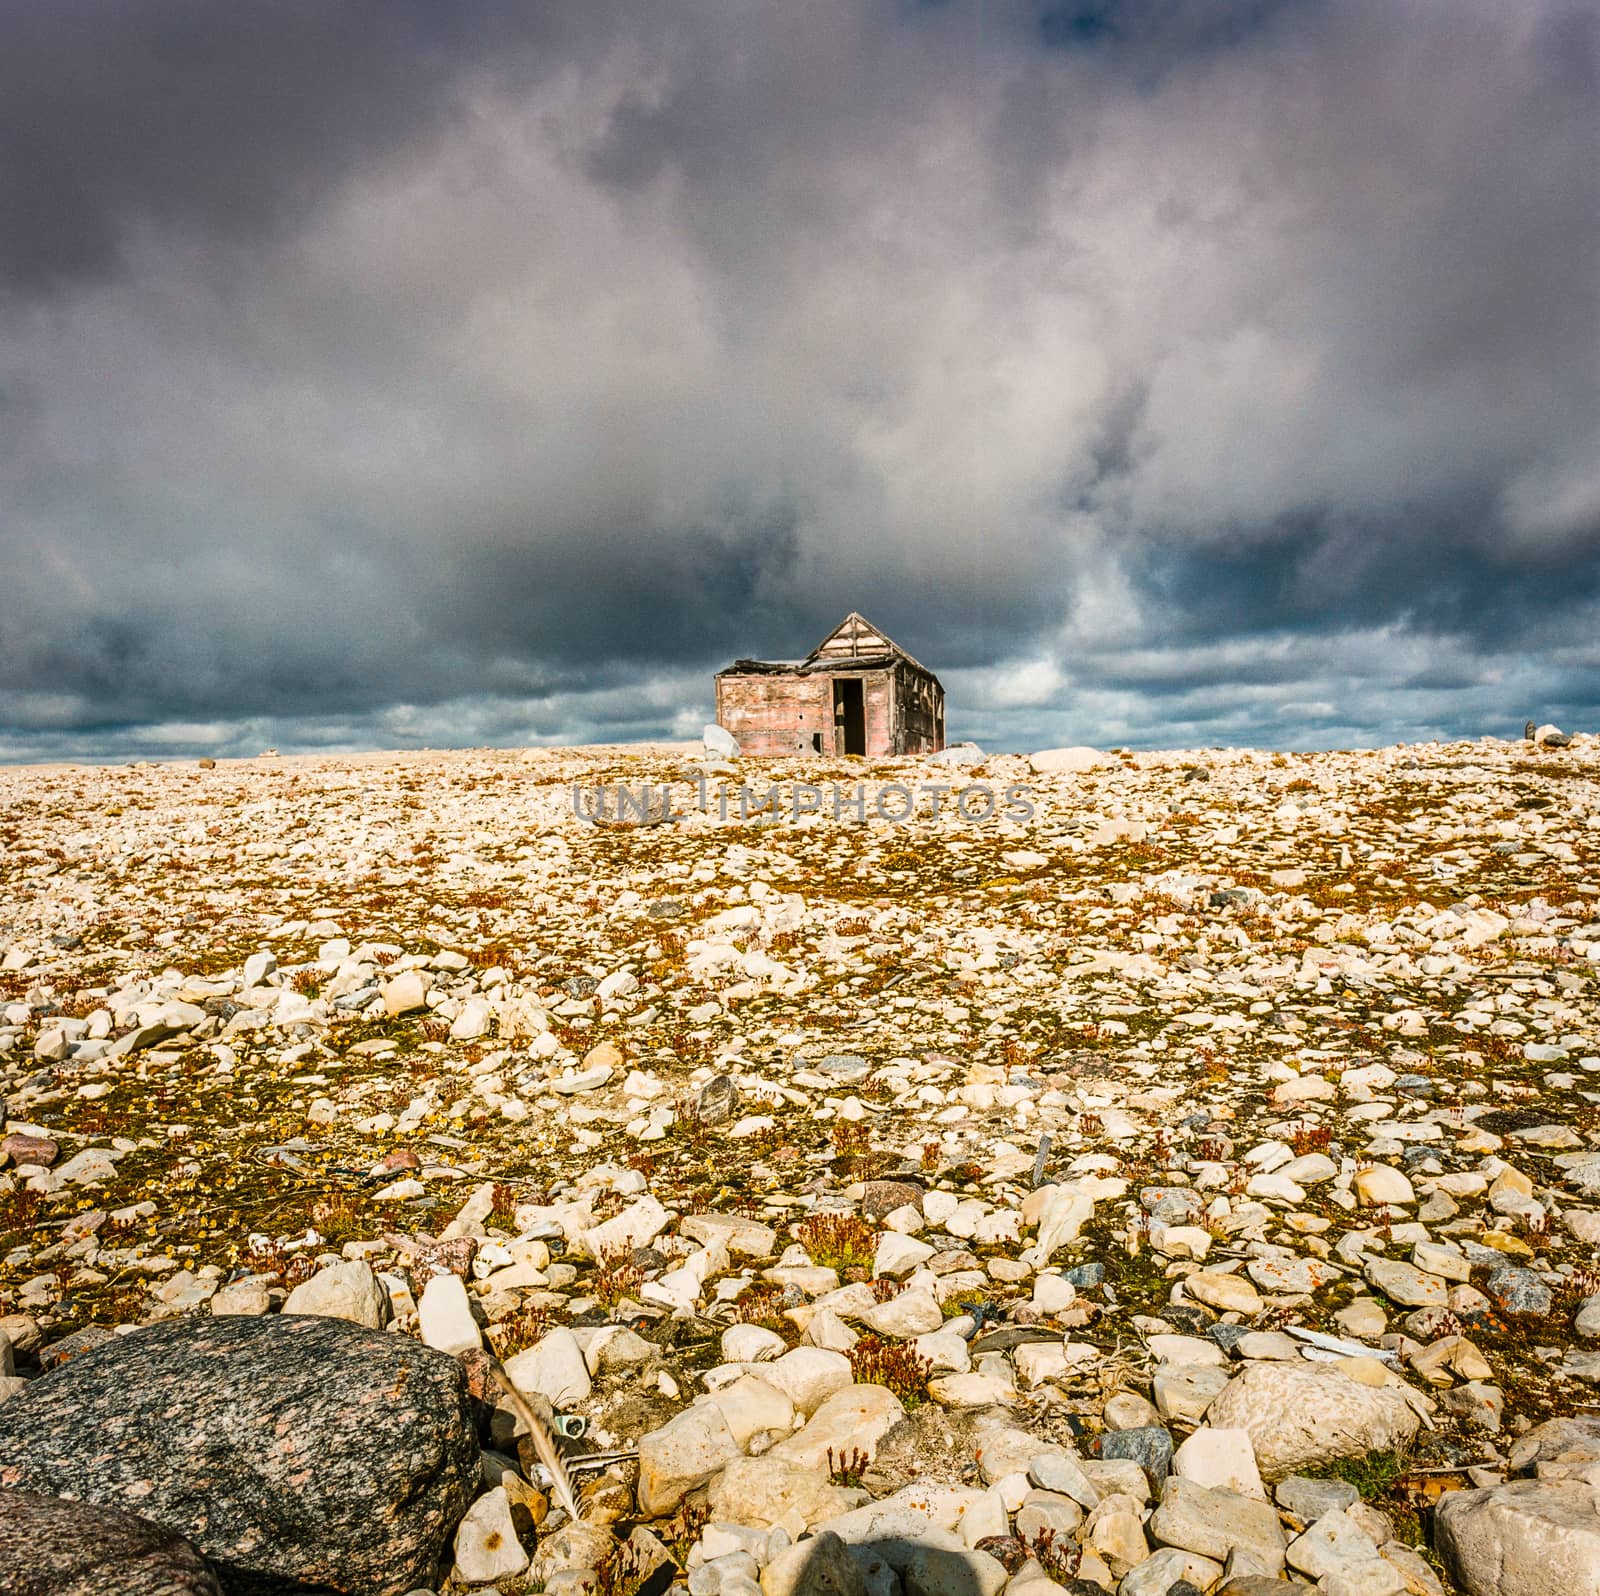 Deserted, weather-worn hunter's cabin in the Arctic by Sprague